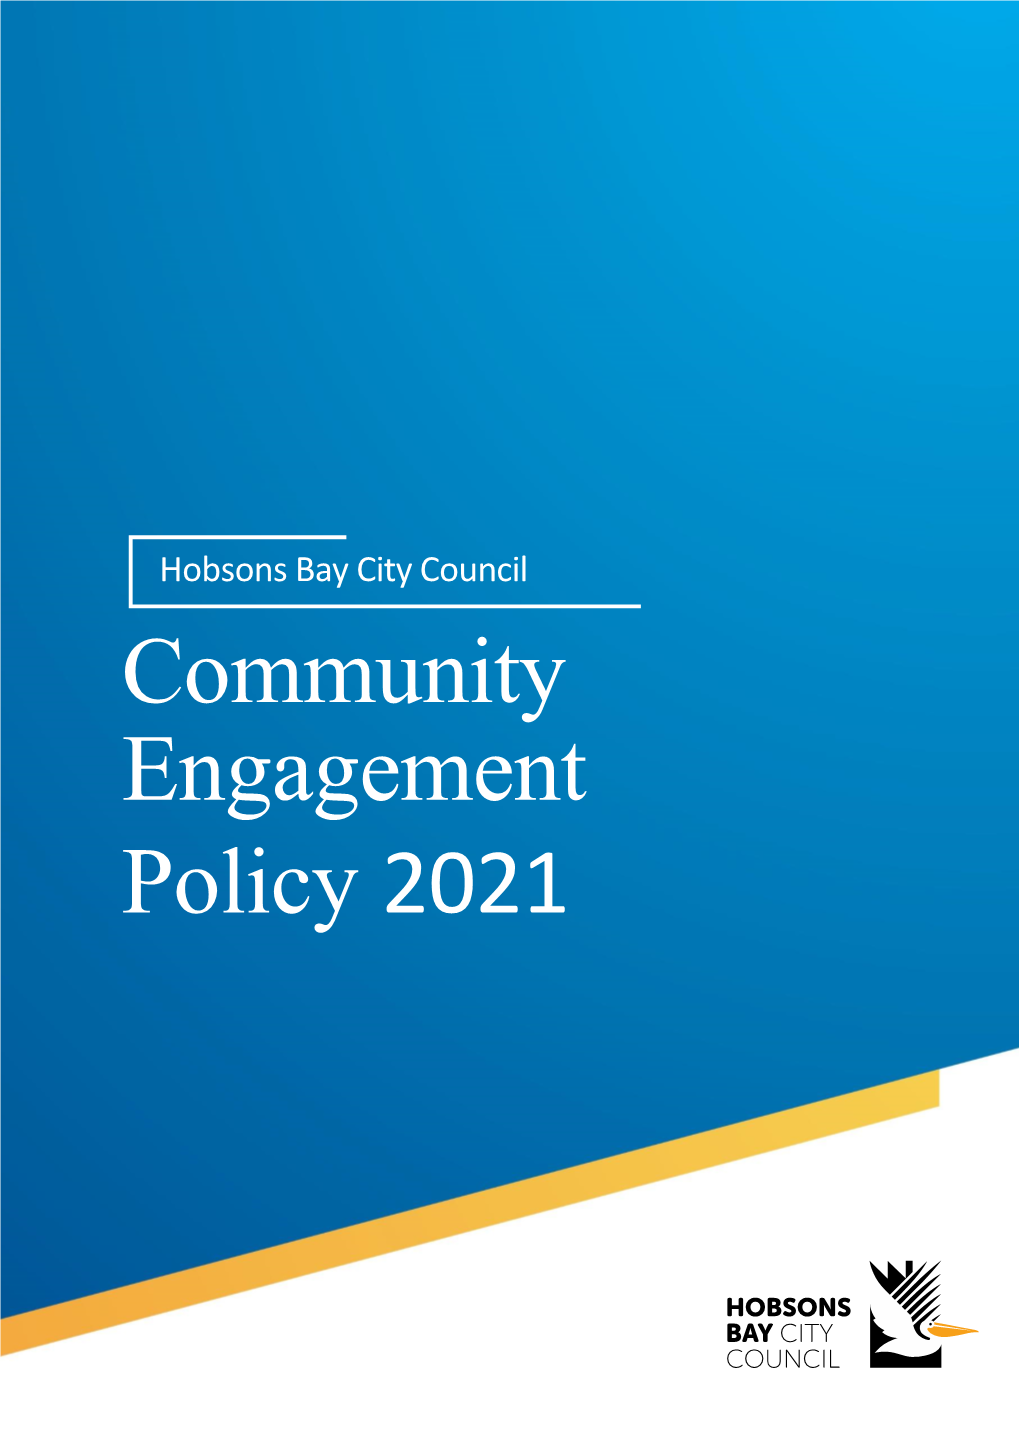 Community Engagement Policy 2021